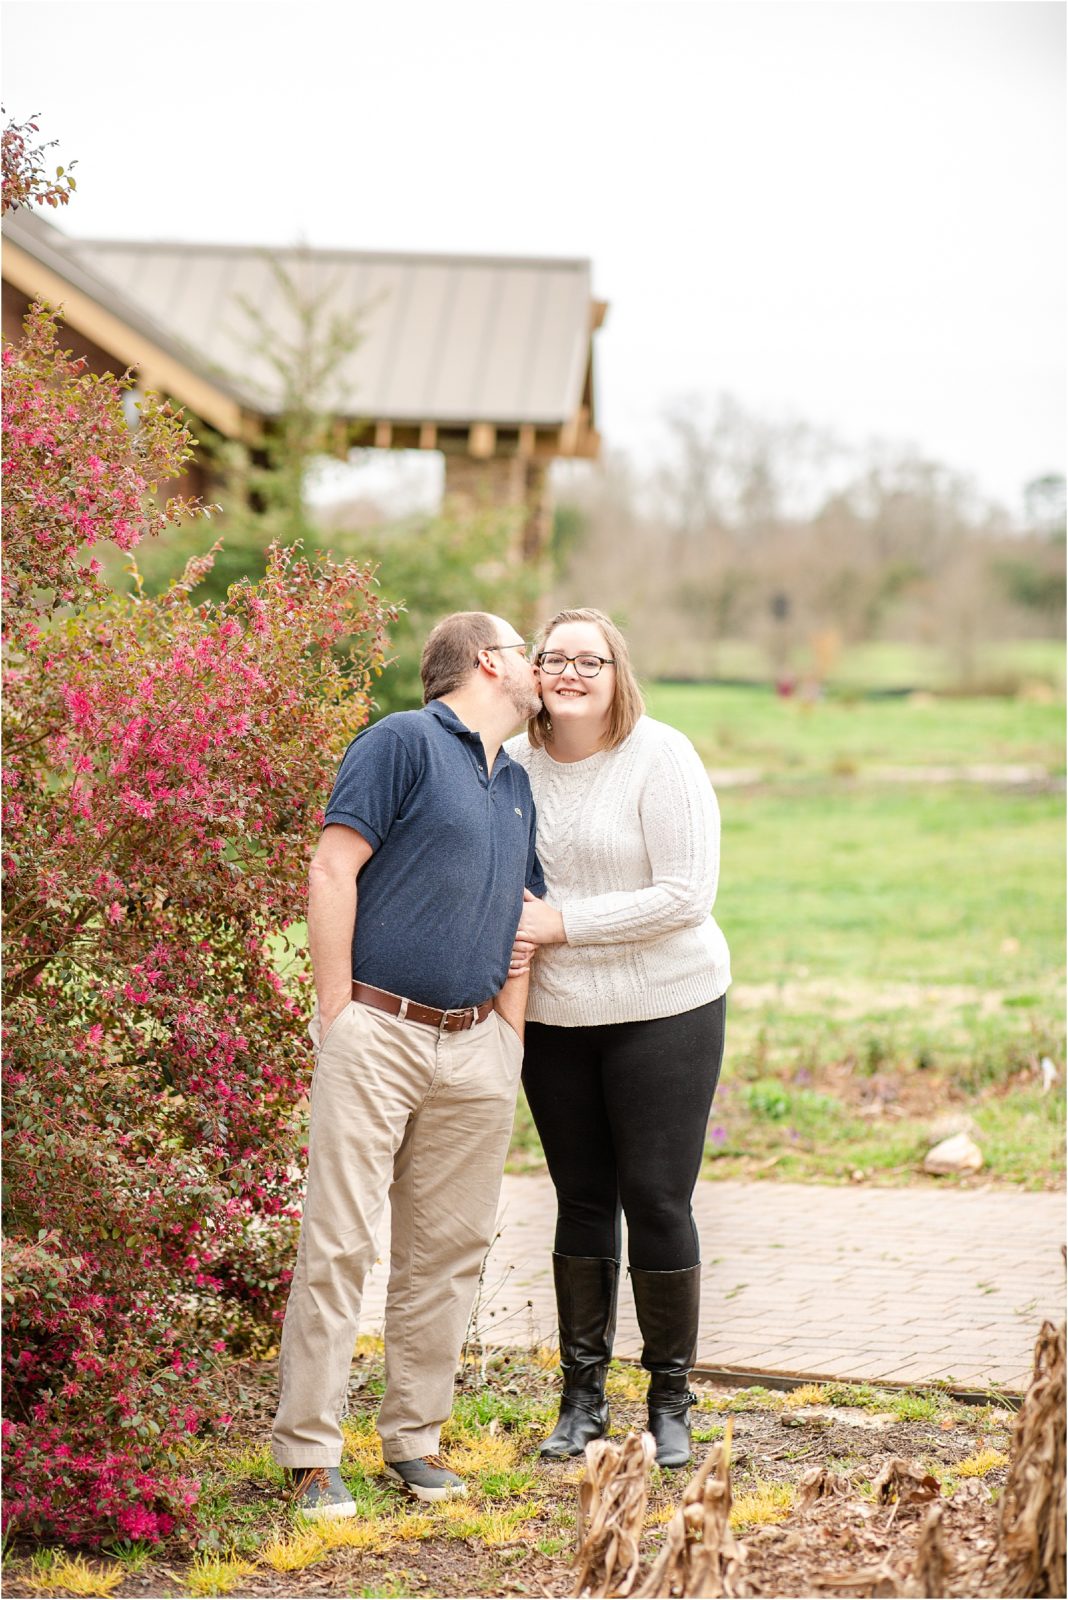 Engagement session photos in garden